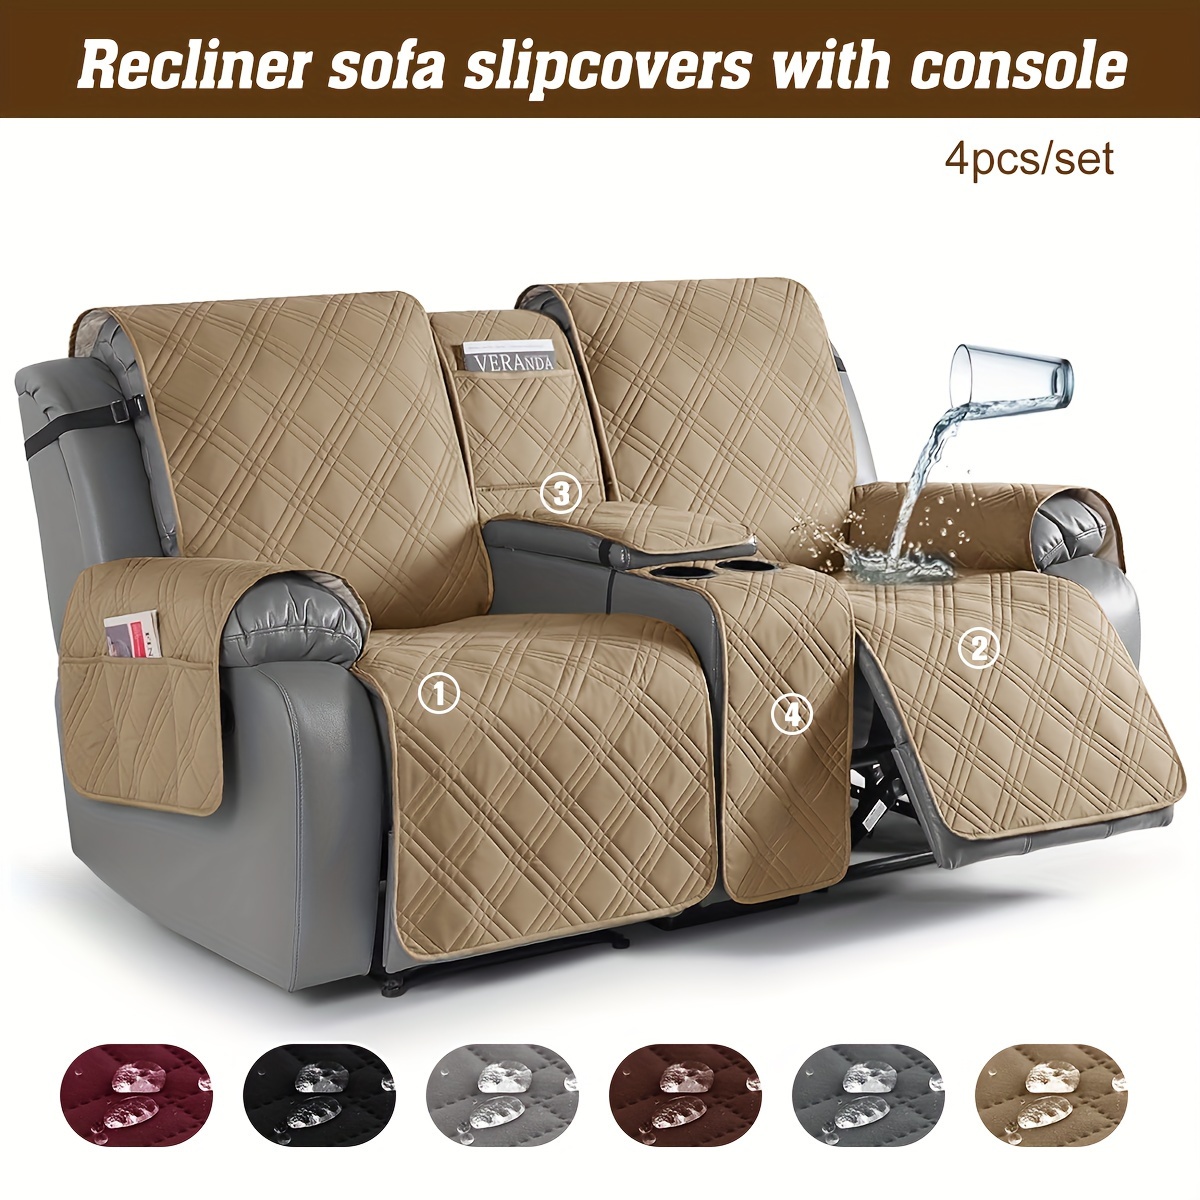 

Waterproof Recliner Slipcover - Modern, Easy-clean Polyester Cover For Double Massage Chairs With Cup Holder Design, Pet-friendly & Machine Washable